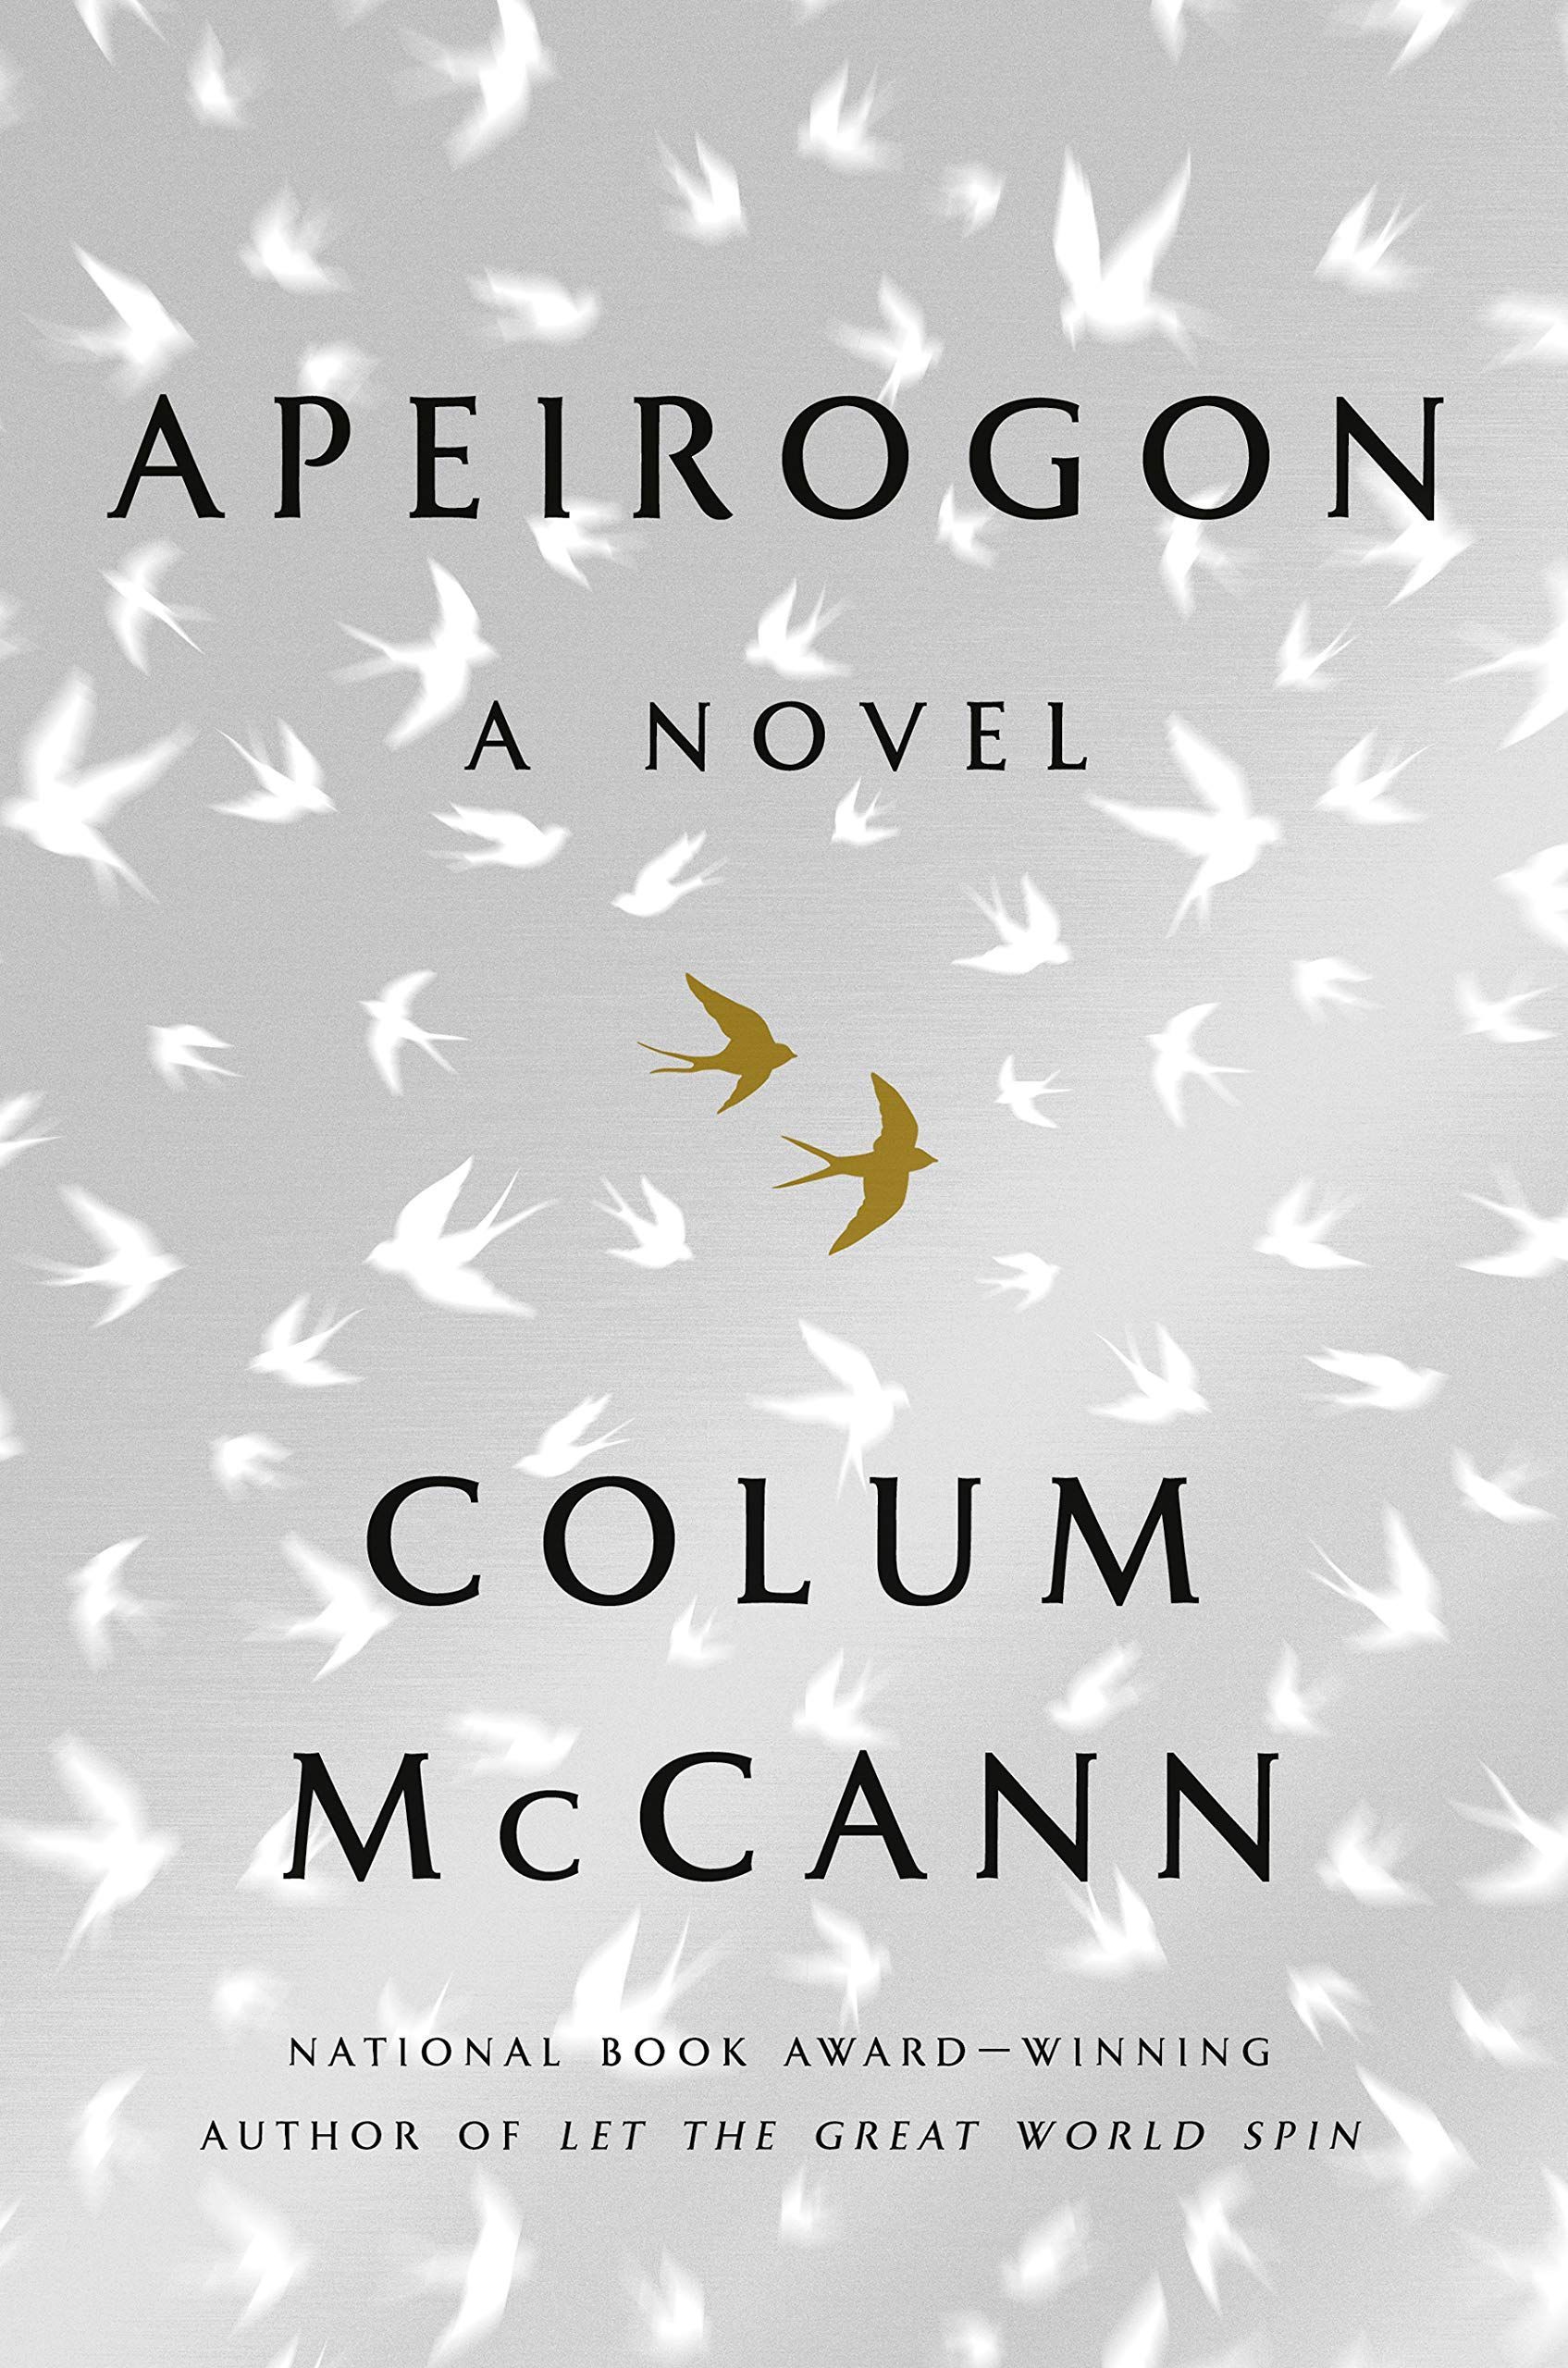 Also About Birds: The Israeli-Palestinian Conflict in Colum McCann’s “Apeirogon”